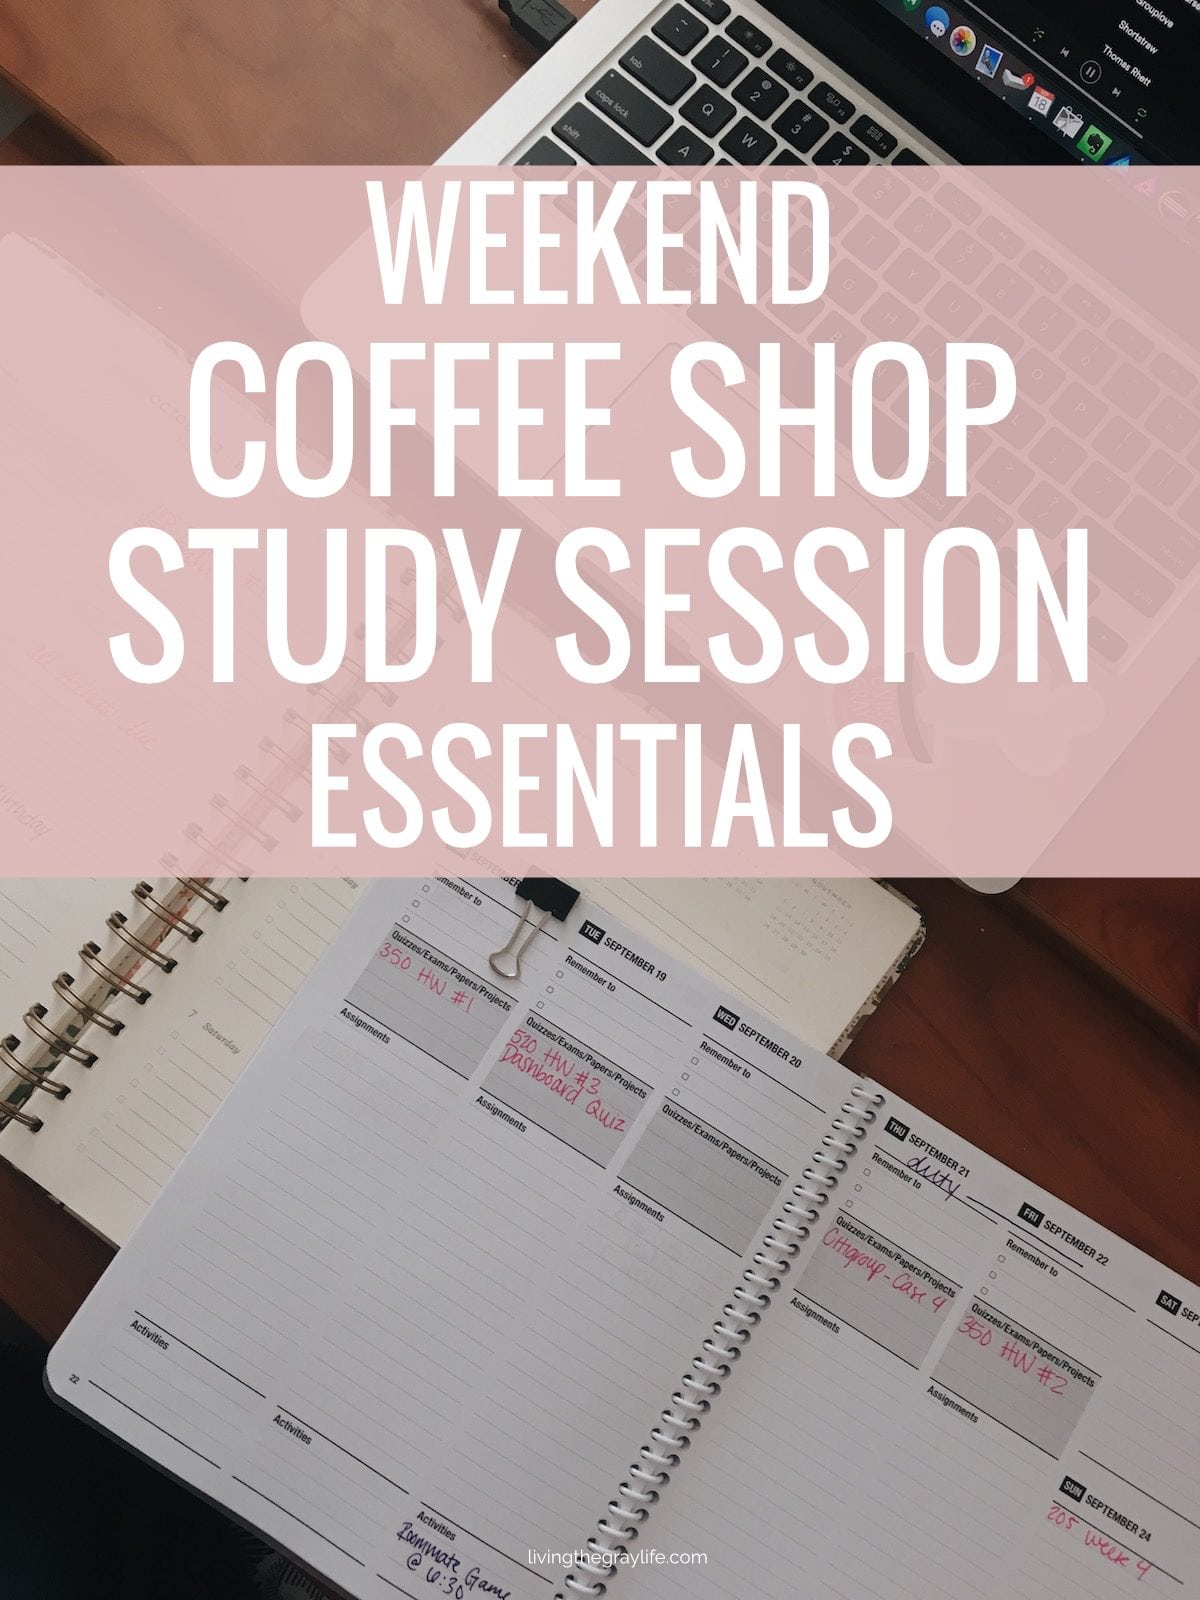 Weekend Coffee Shop Study Session Essentials